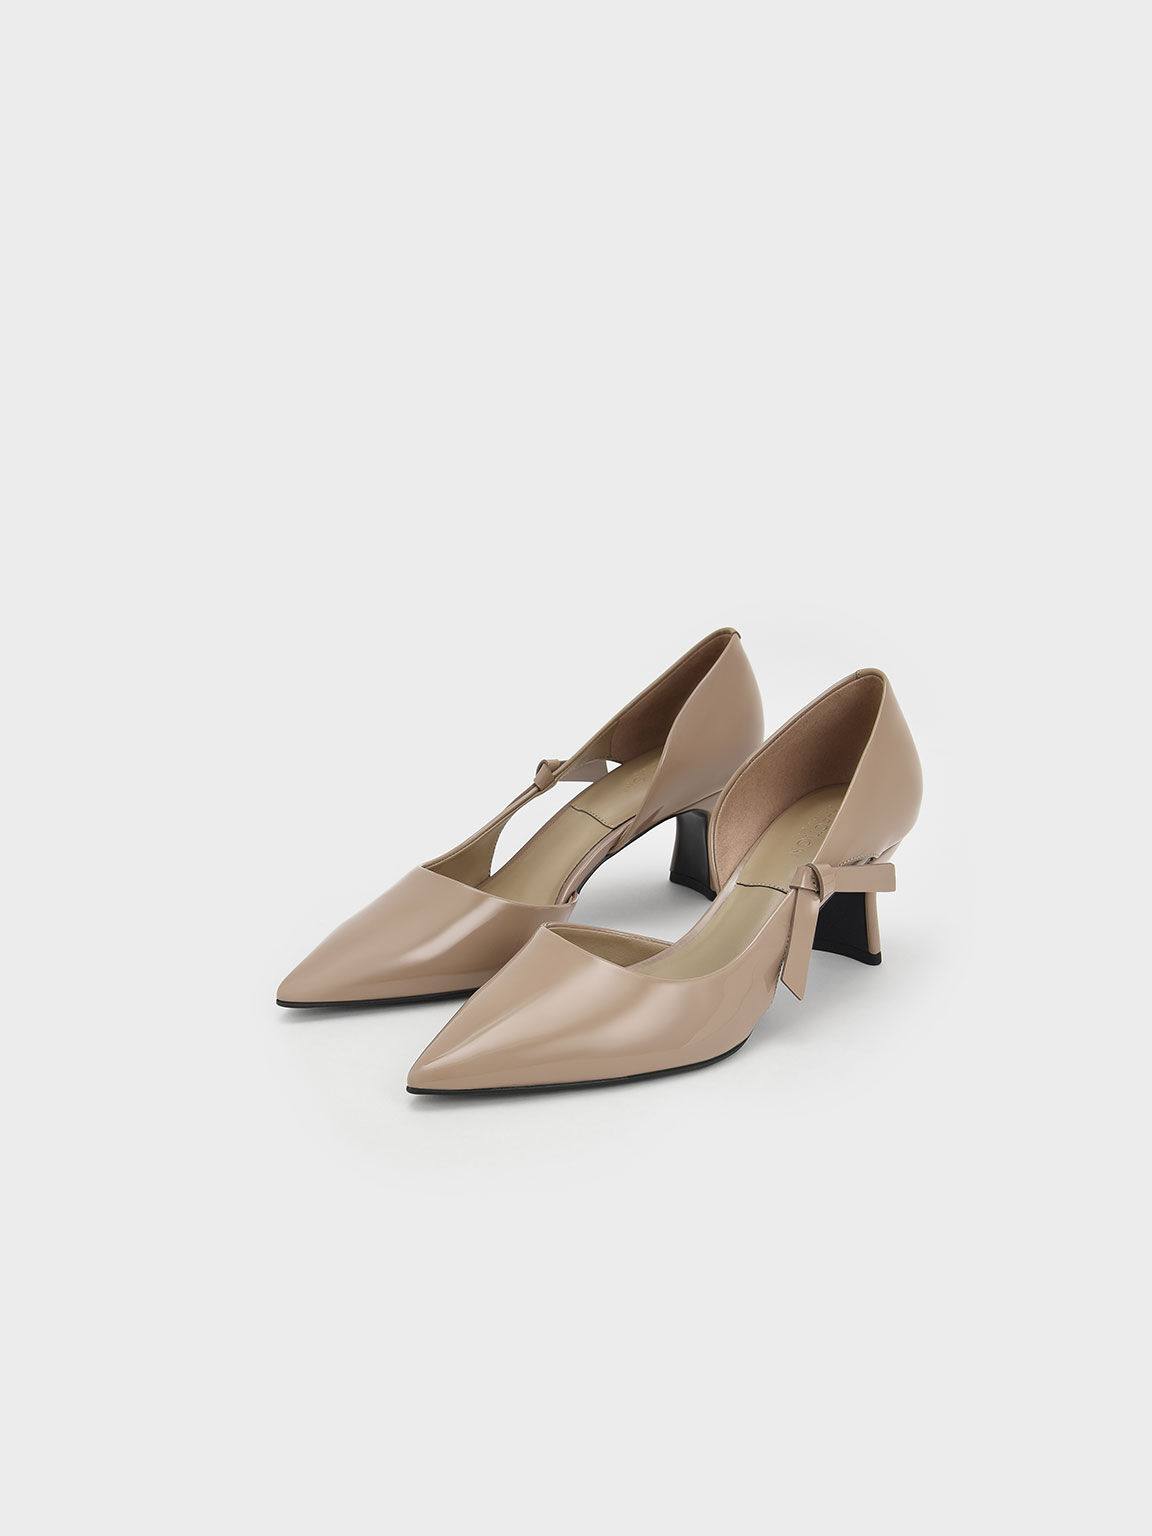 Patent Leather Bow-Tie Half D'Orsay Pumps, Taupe, hi-res